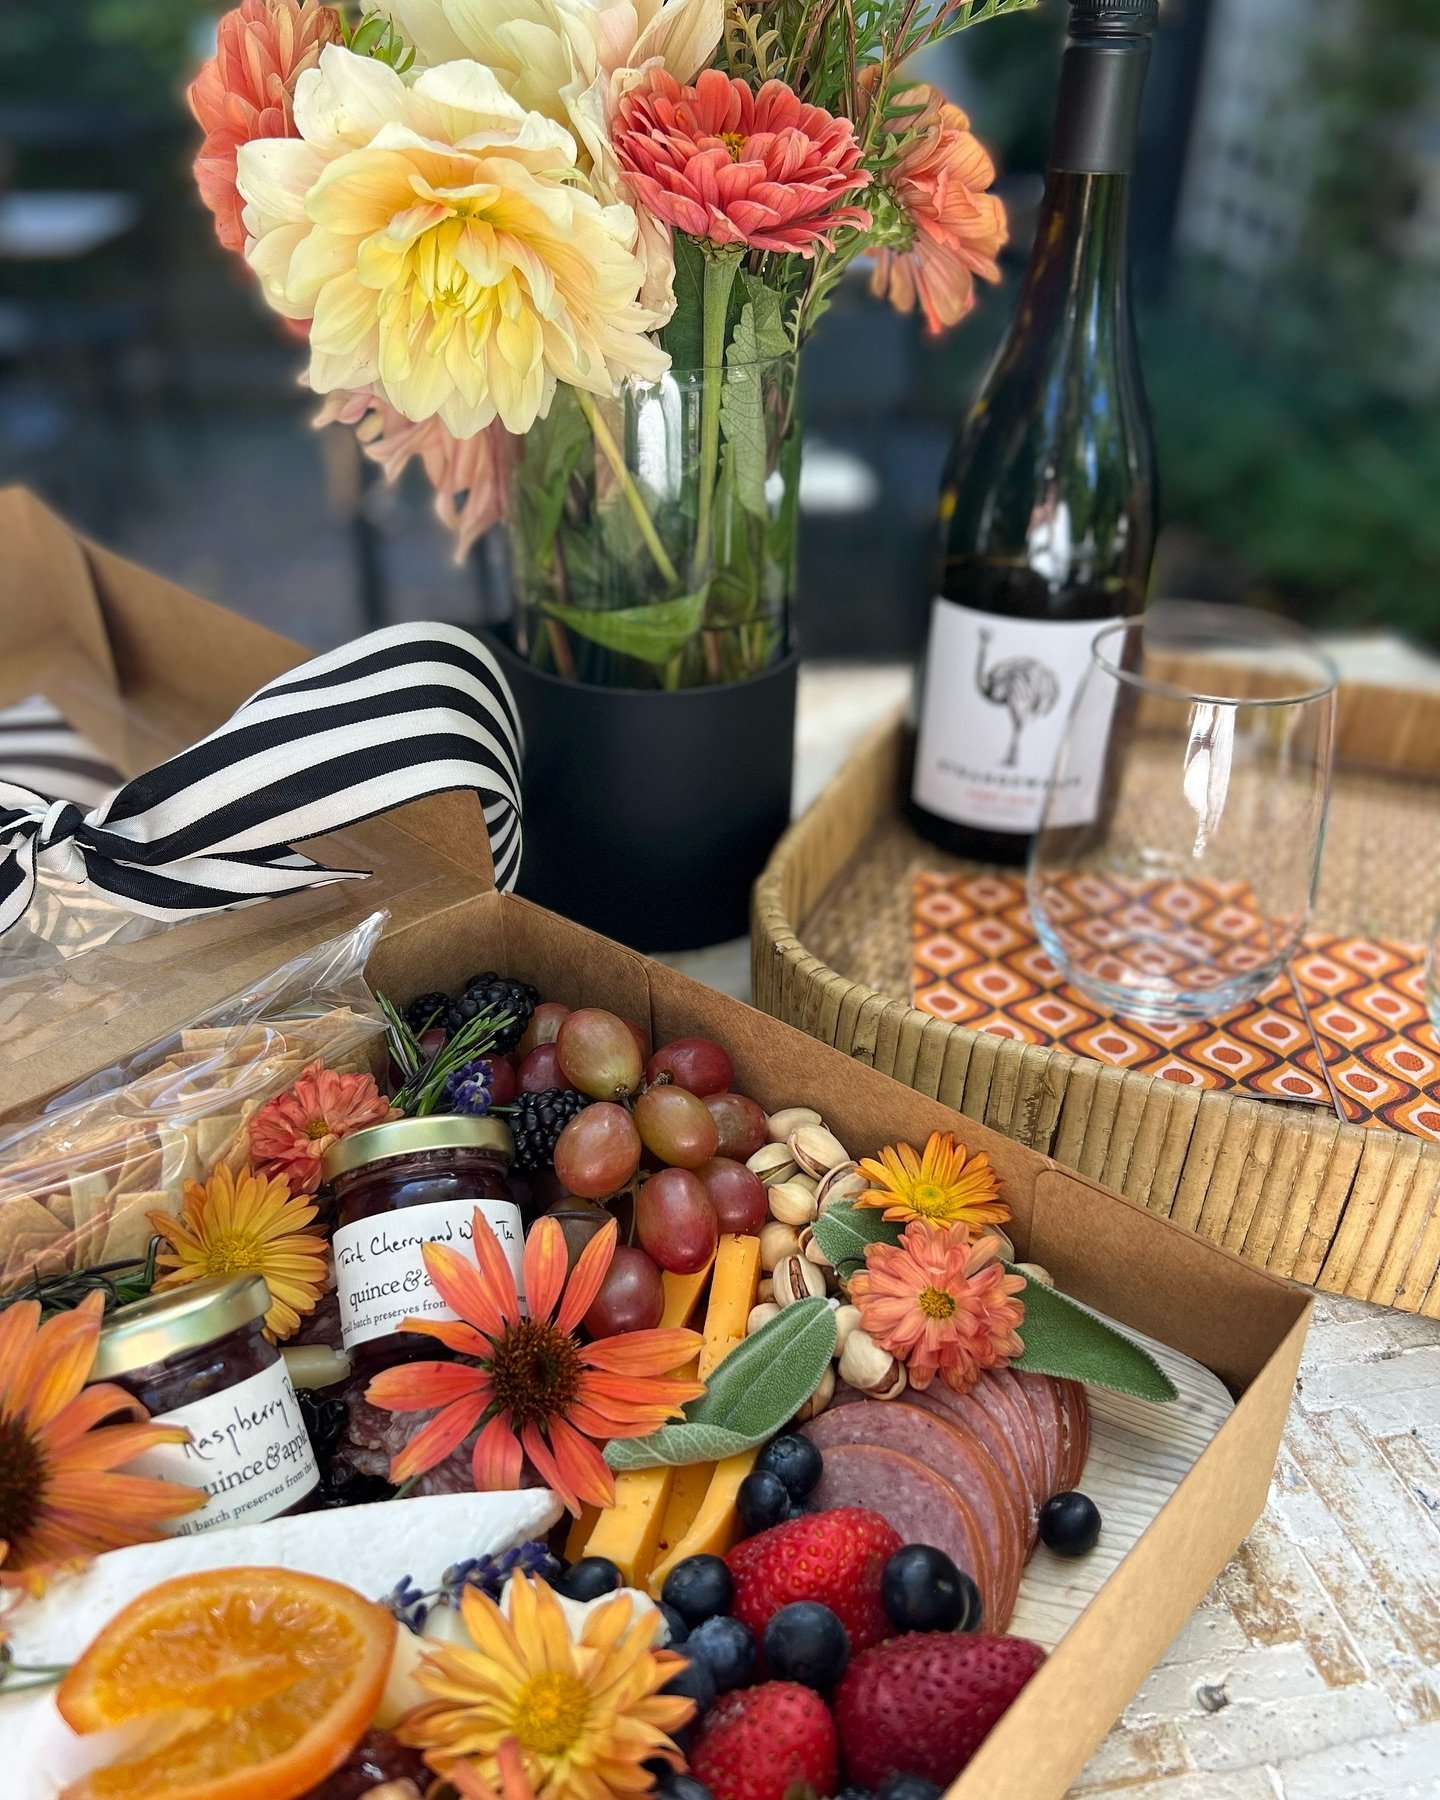 Happy Fun Friday Chi-cuterie friends! Pop in today and enjoy a Lewis box for only $32 and our favorite Pinot Noir! 

Strangeways is produced in Buellton, California. Buellton is located in the Santa Ynez Valley and happens to be home to a large Emu a